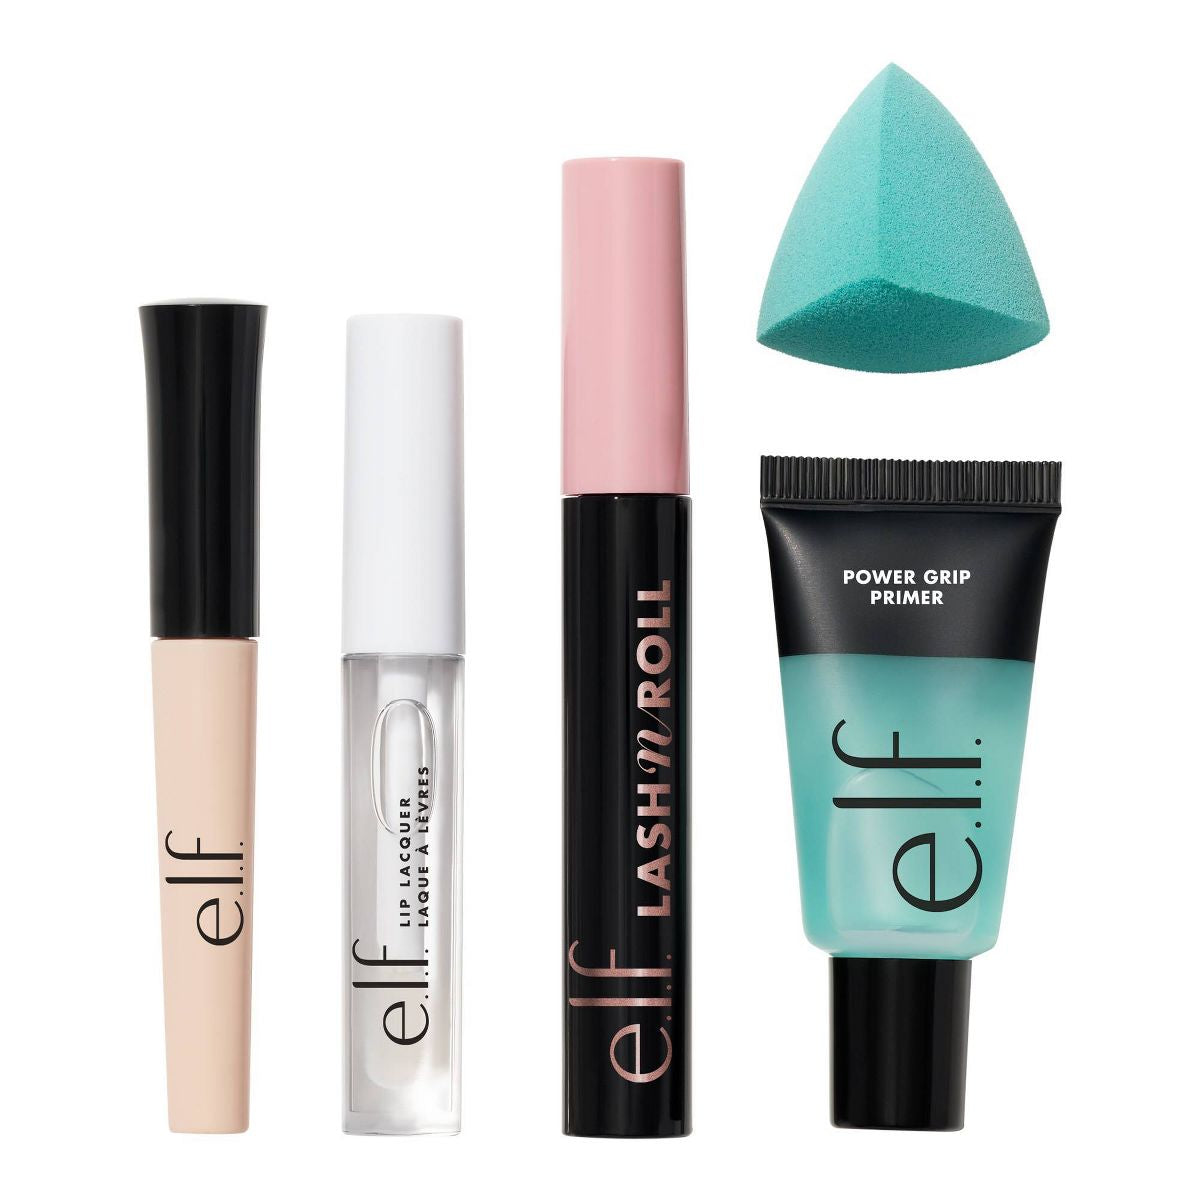 E.l.f. - The All Day Every Day Holiday Cosmetics Gift Set